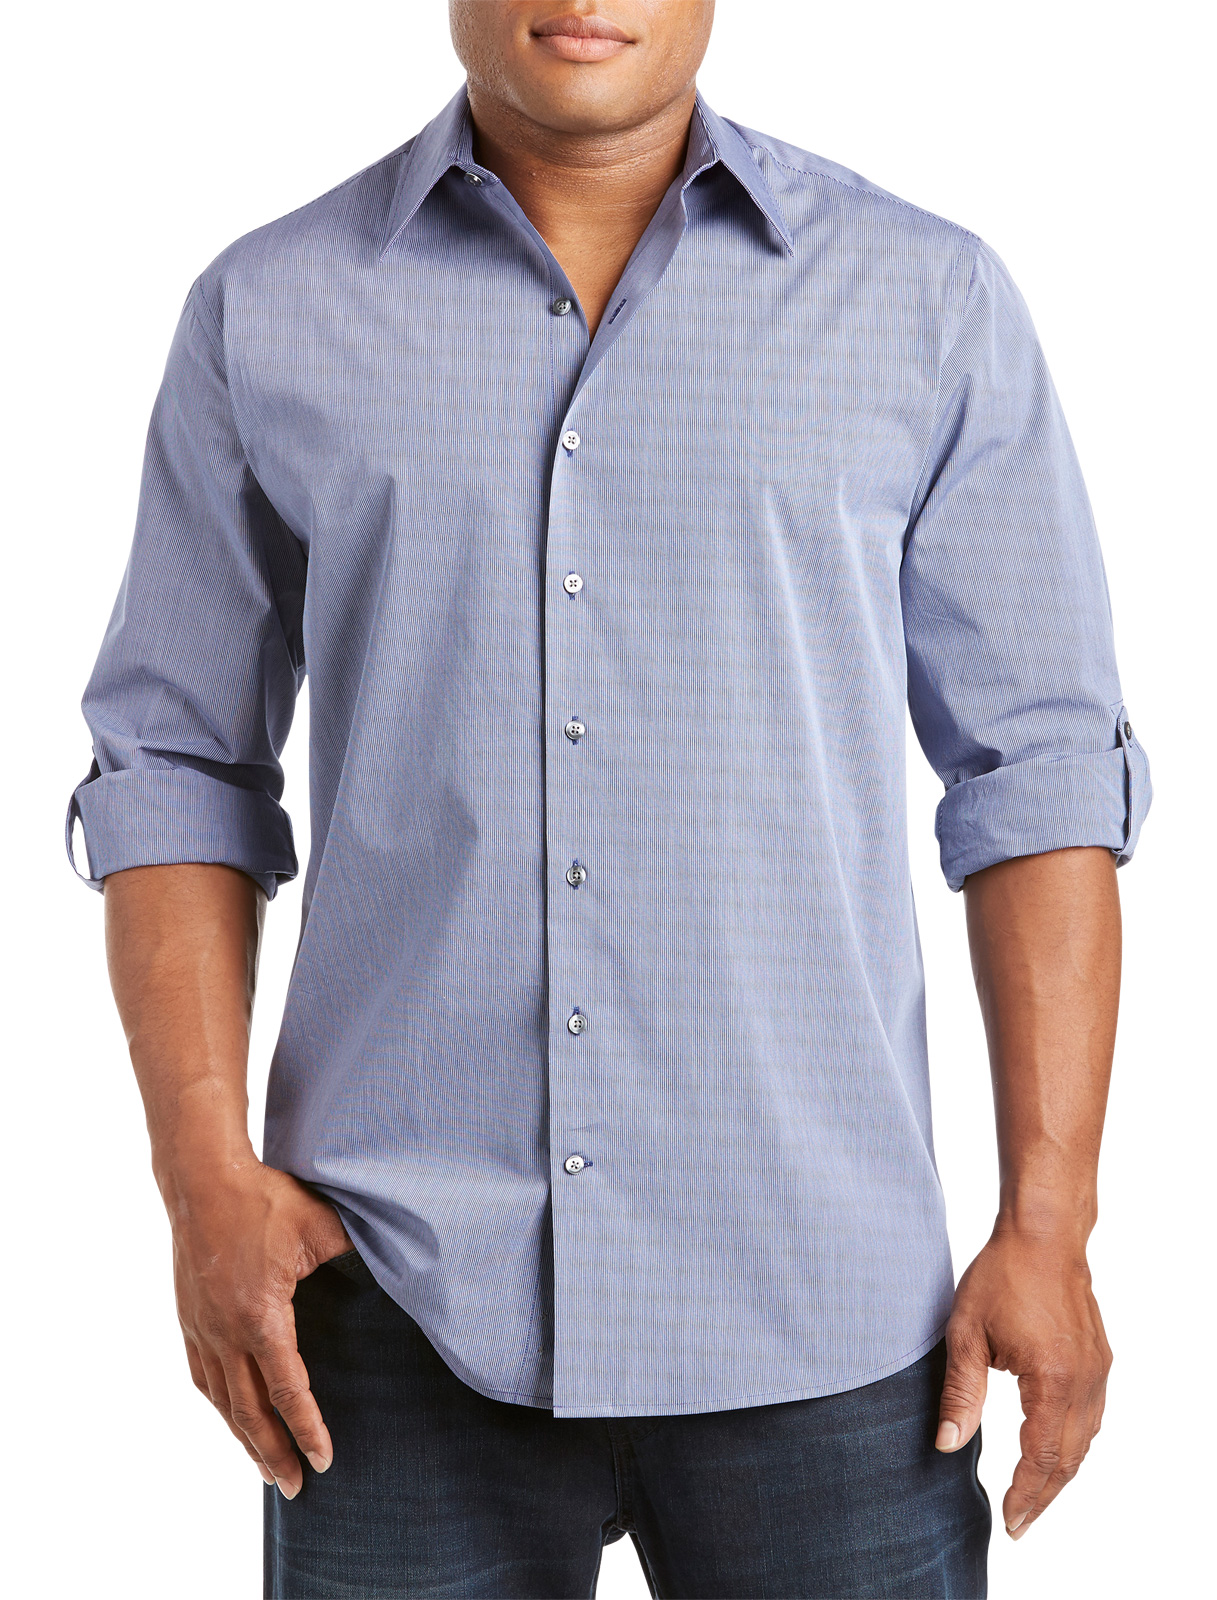 Synrgy Men's Big and Tall Roll-Sleeve Stripe Sport Shirt